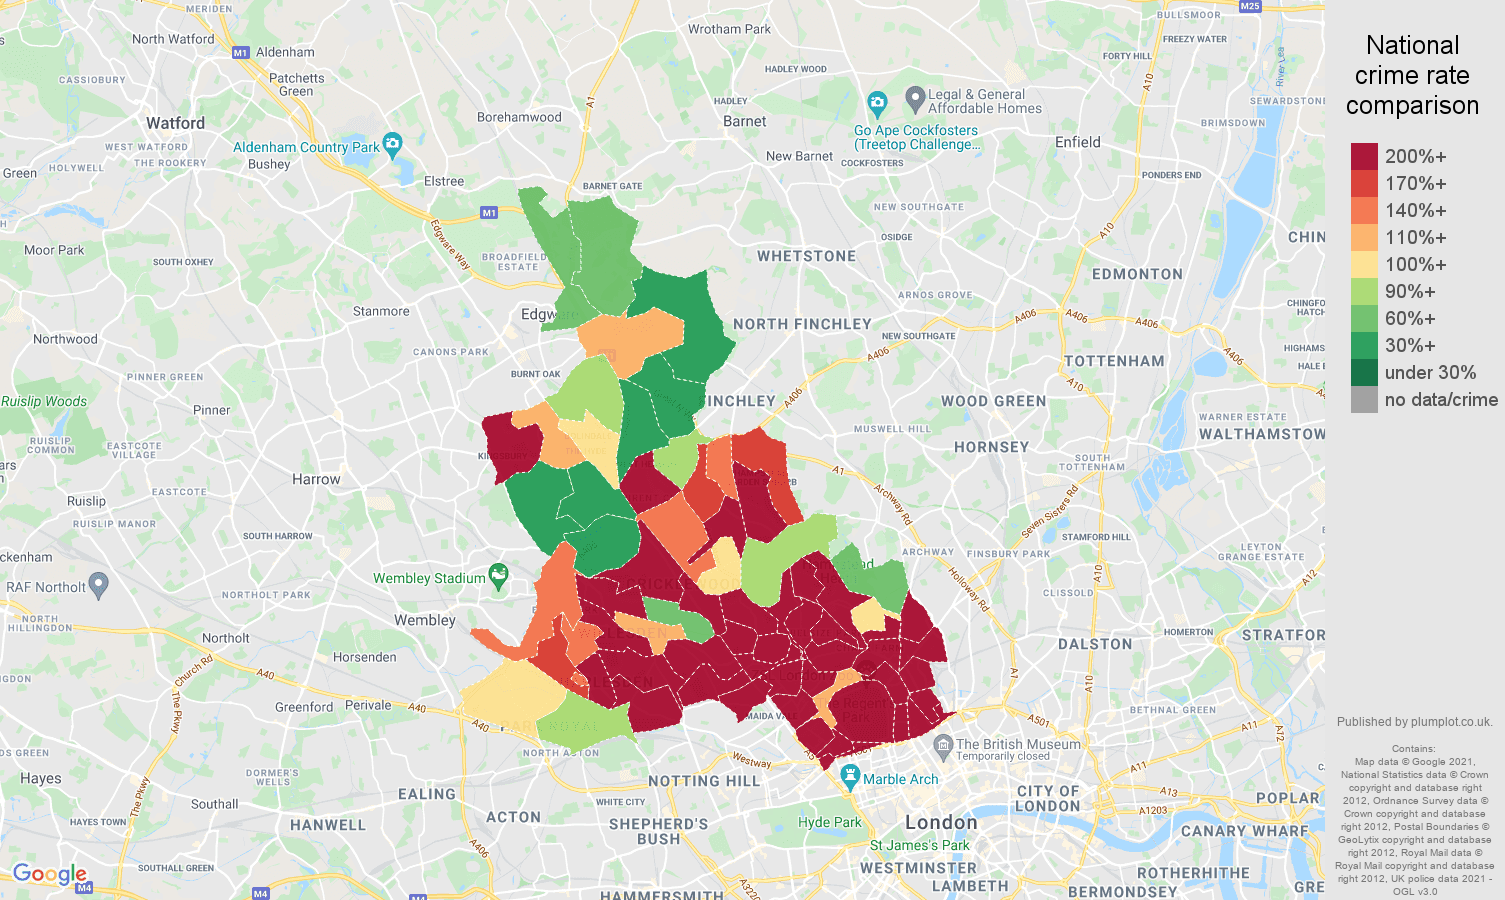 North West London theft from the person crime rate comparison map